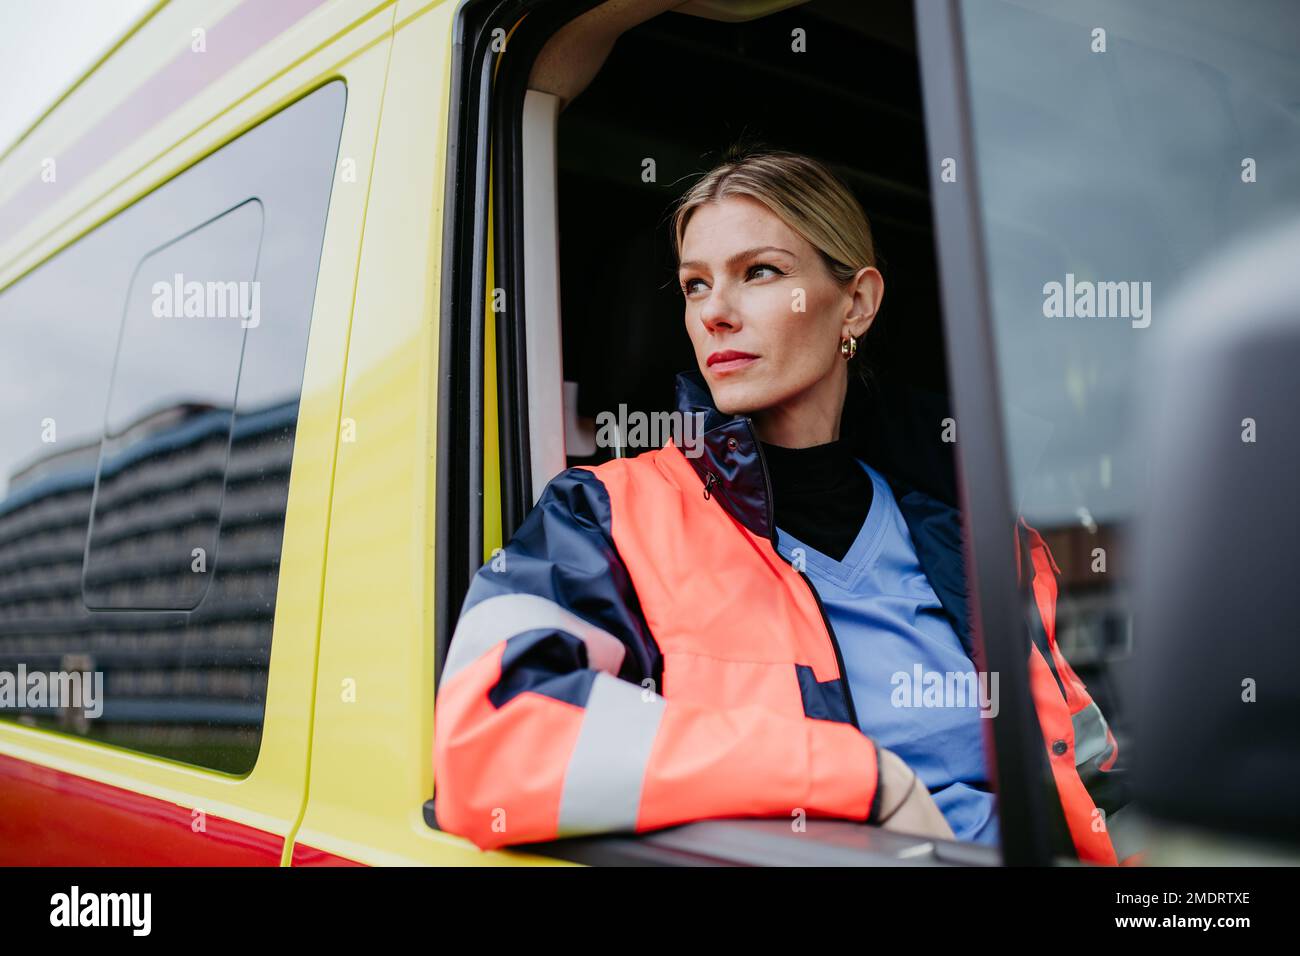 Portrait of young woman doctor sitting in ambulance car. Stock Photo